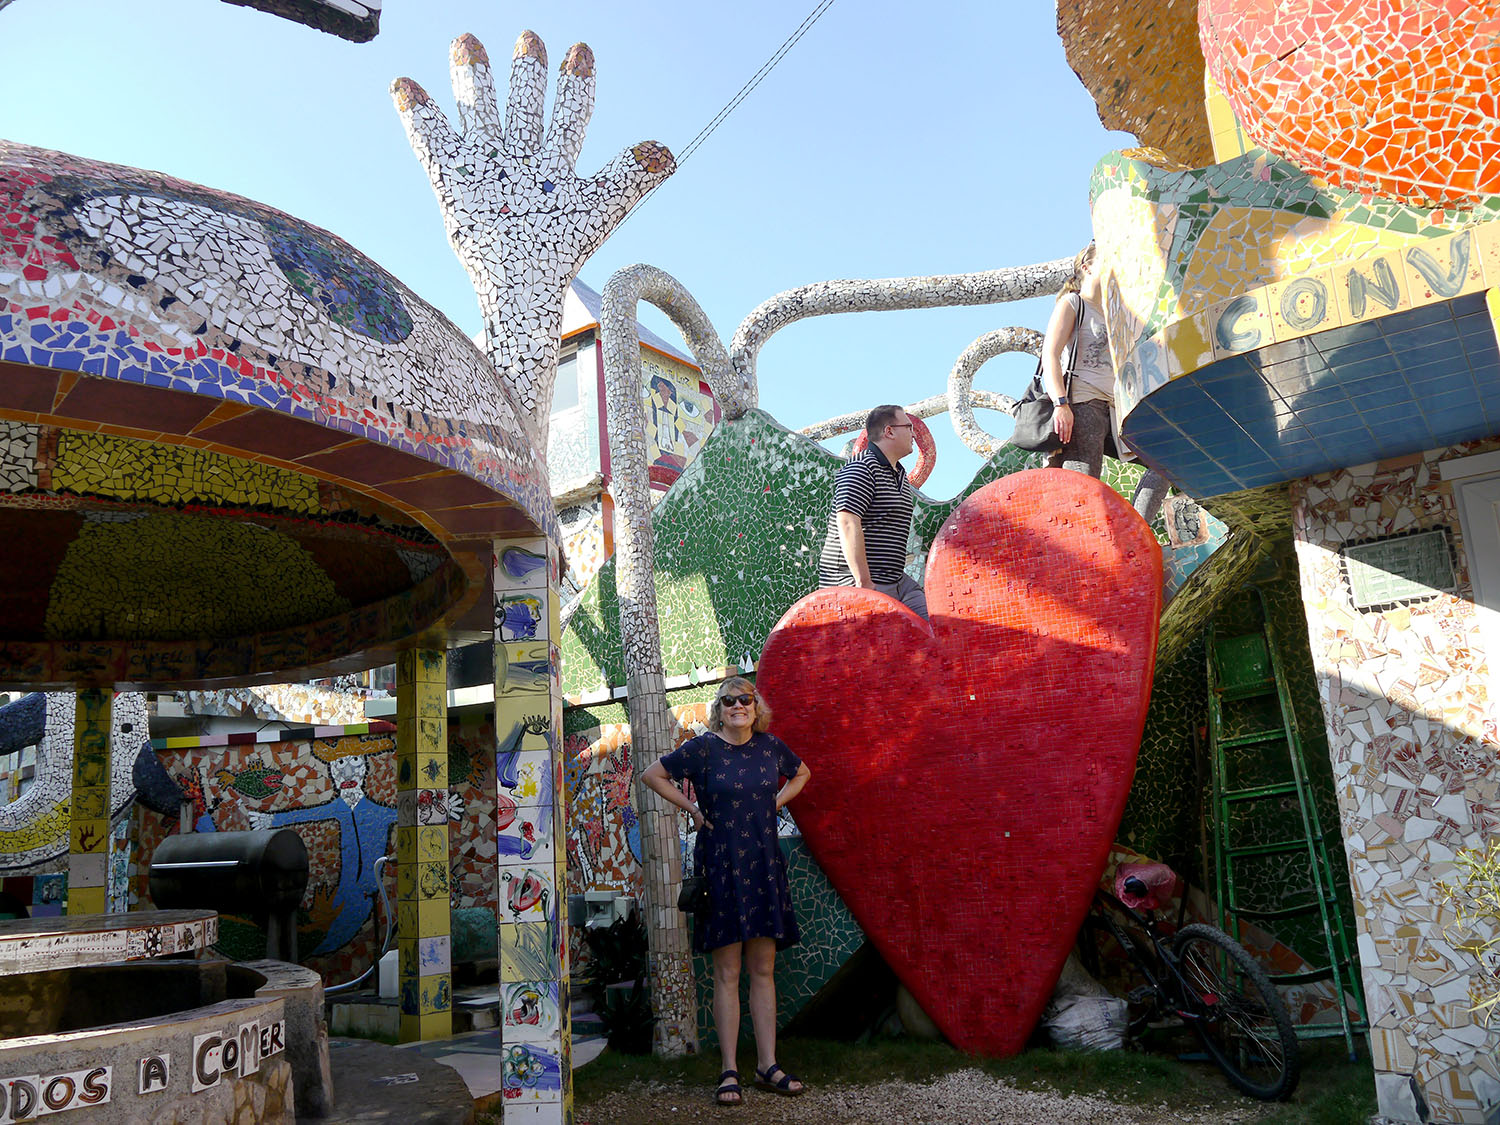 A woman stands in front a giant red heart made out of mosaics, while a man climbs up stairs of mosaics behind her.